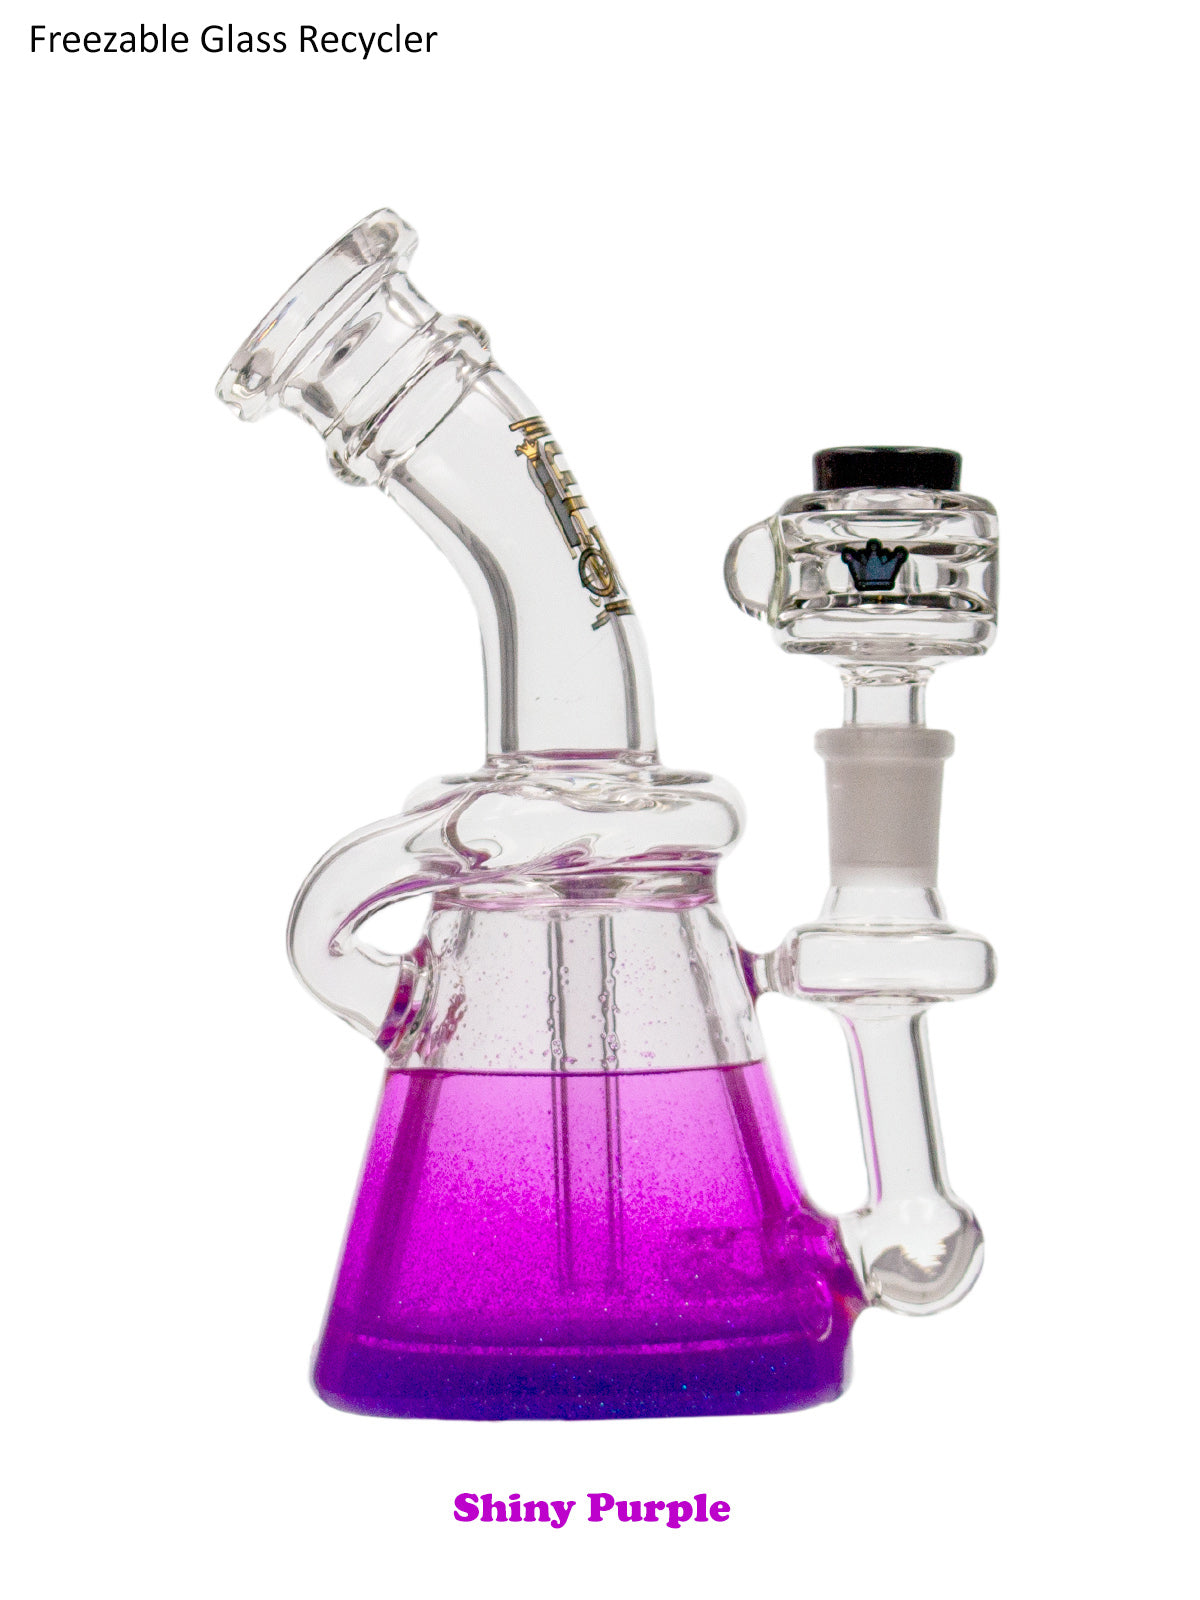 7" Freezable Glass Recycler